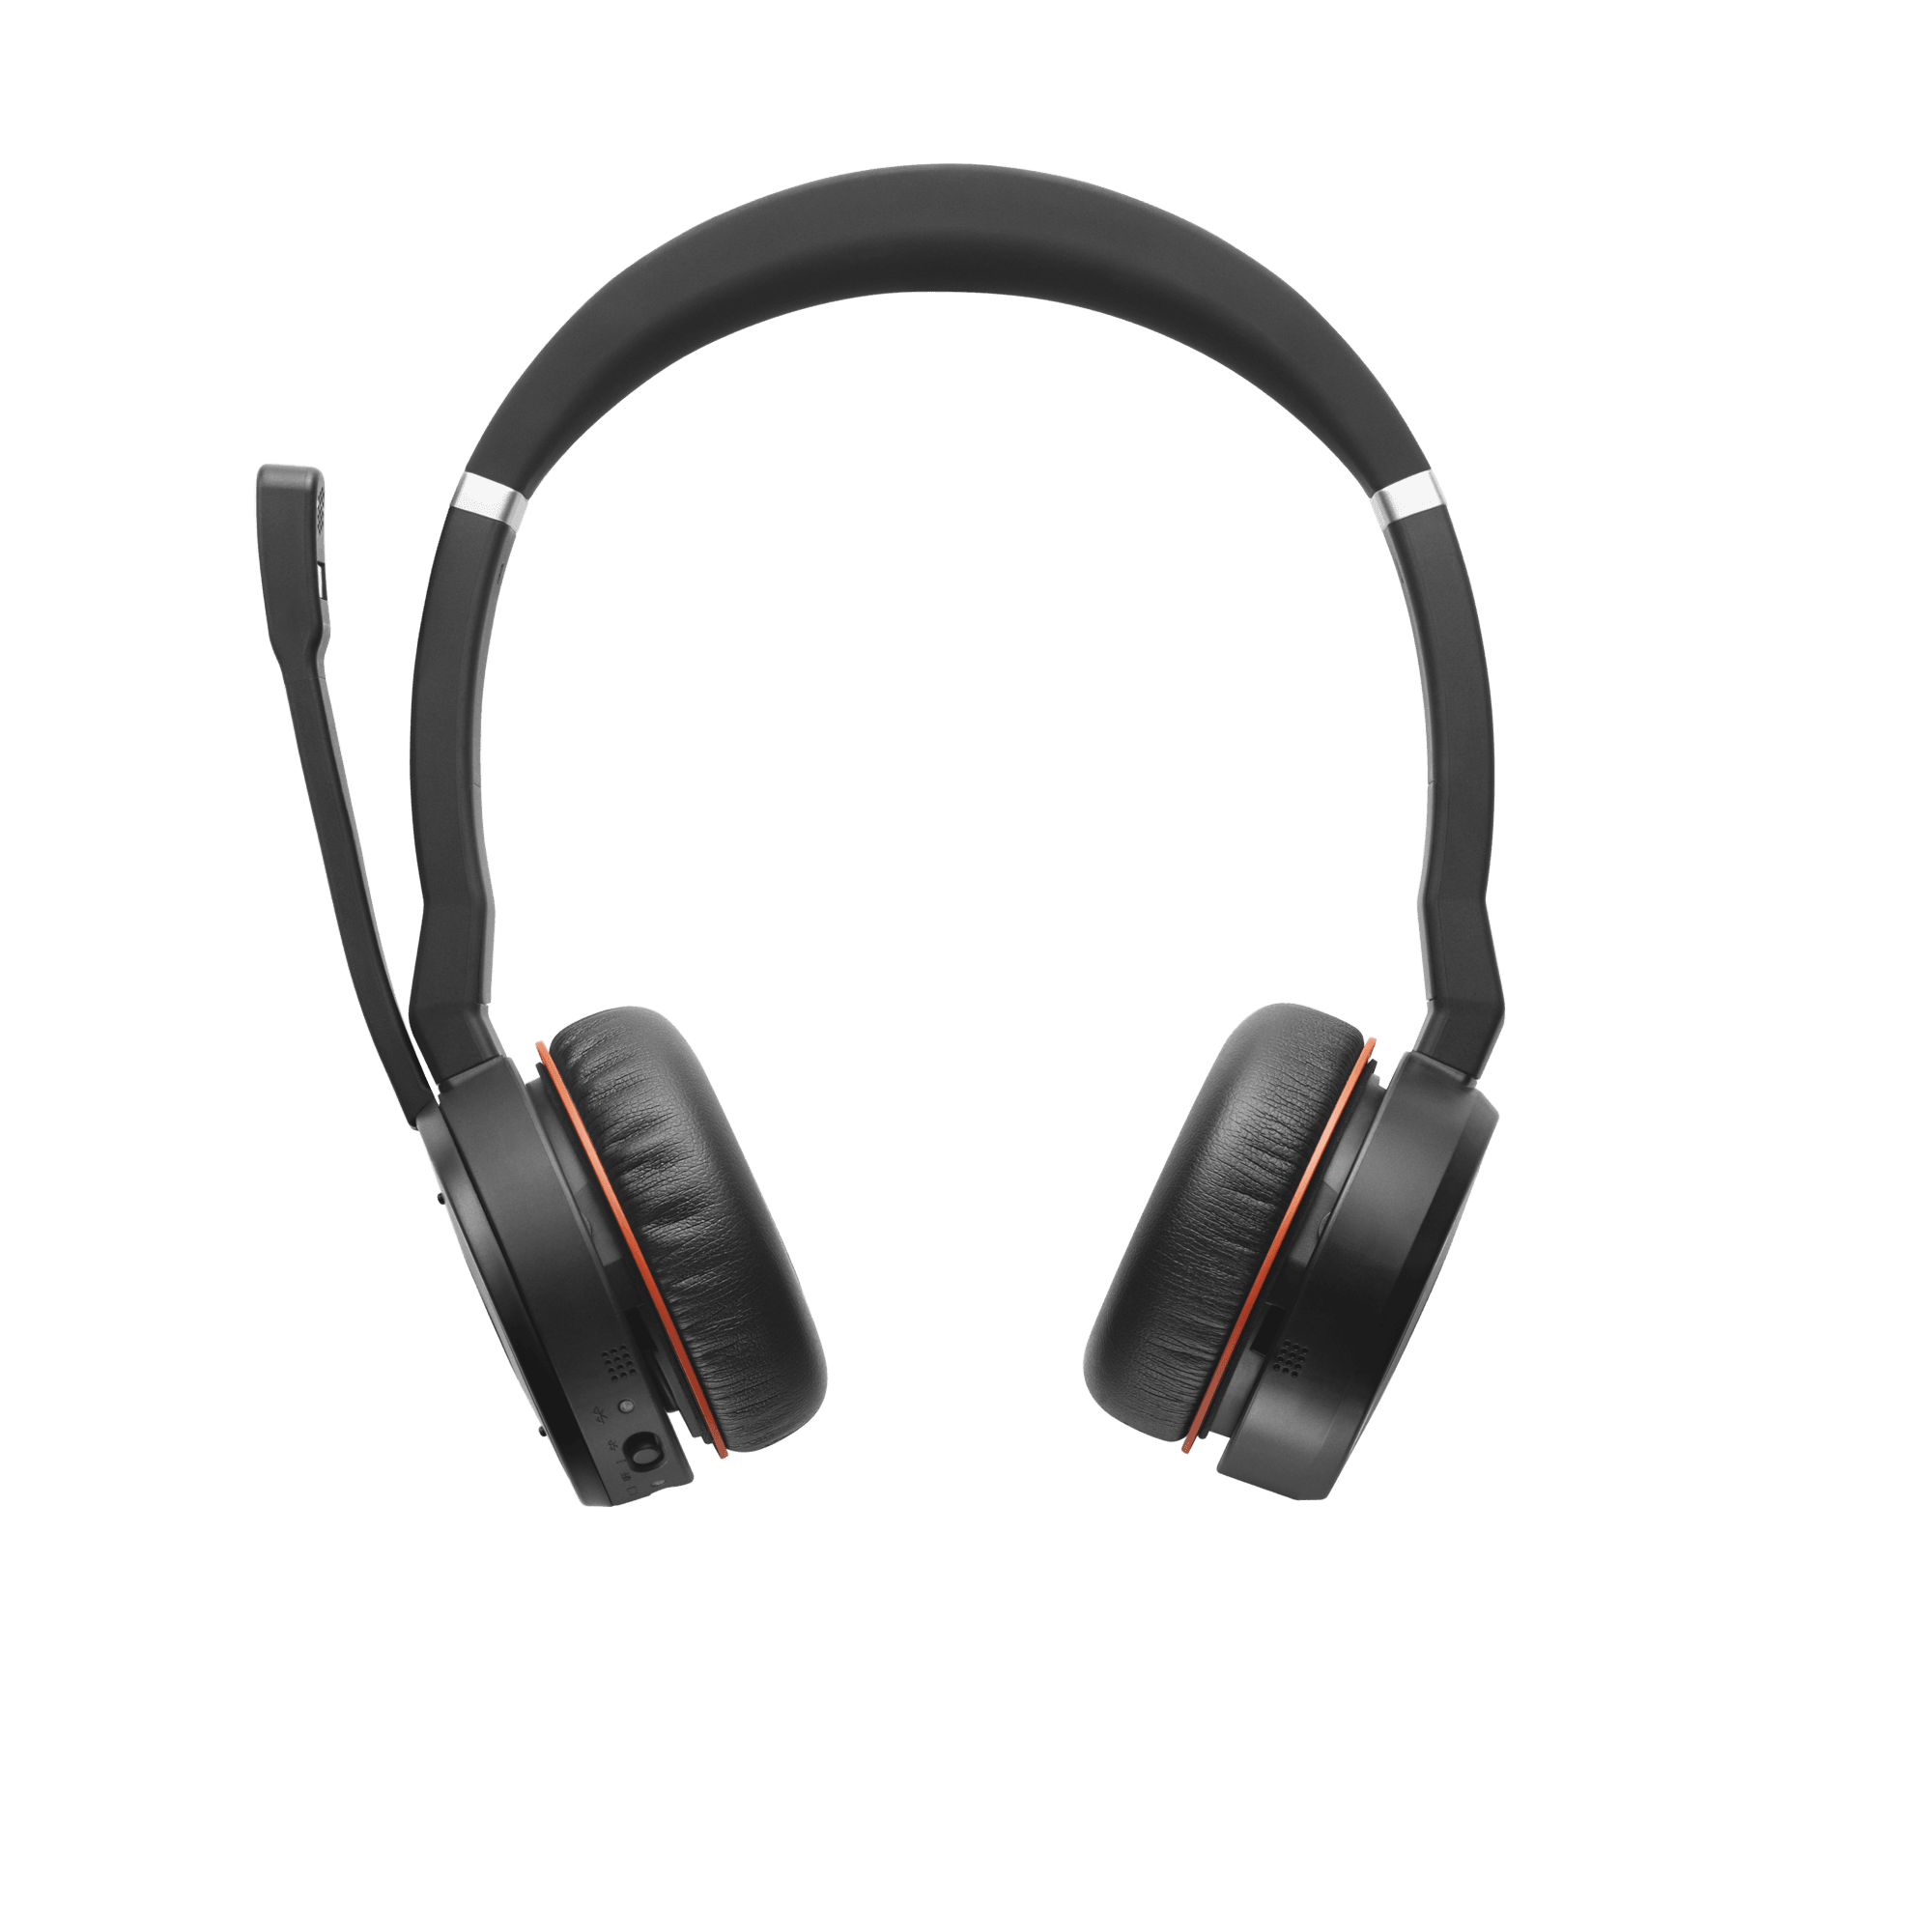 Jabra Evolve 75 headset MS Stereo with Charging Stand 7599-832-199 - Buy Singapore